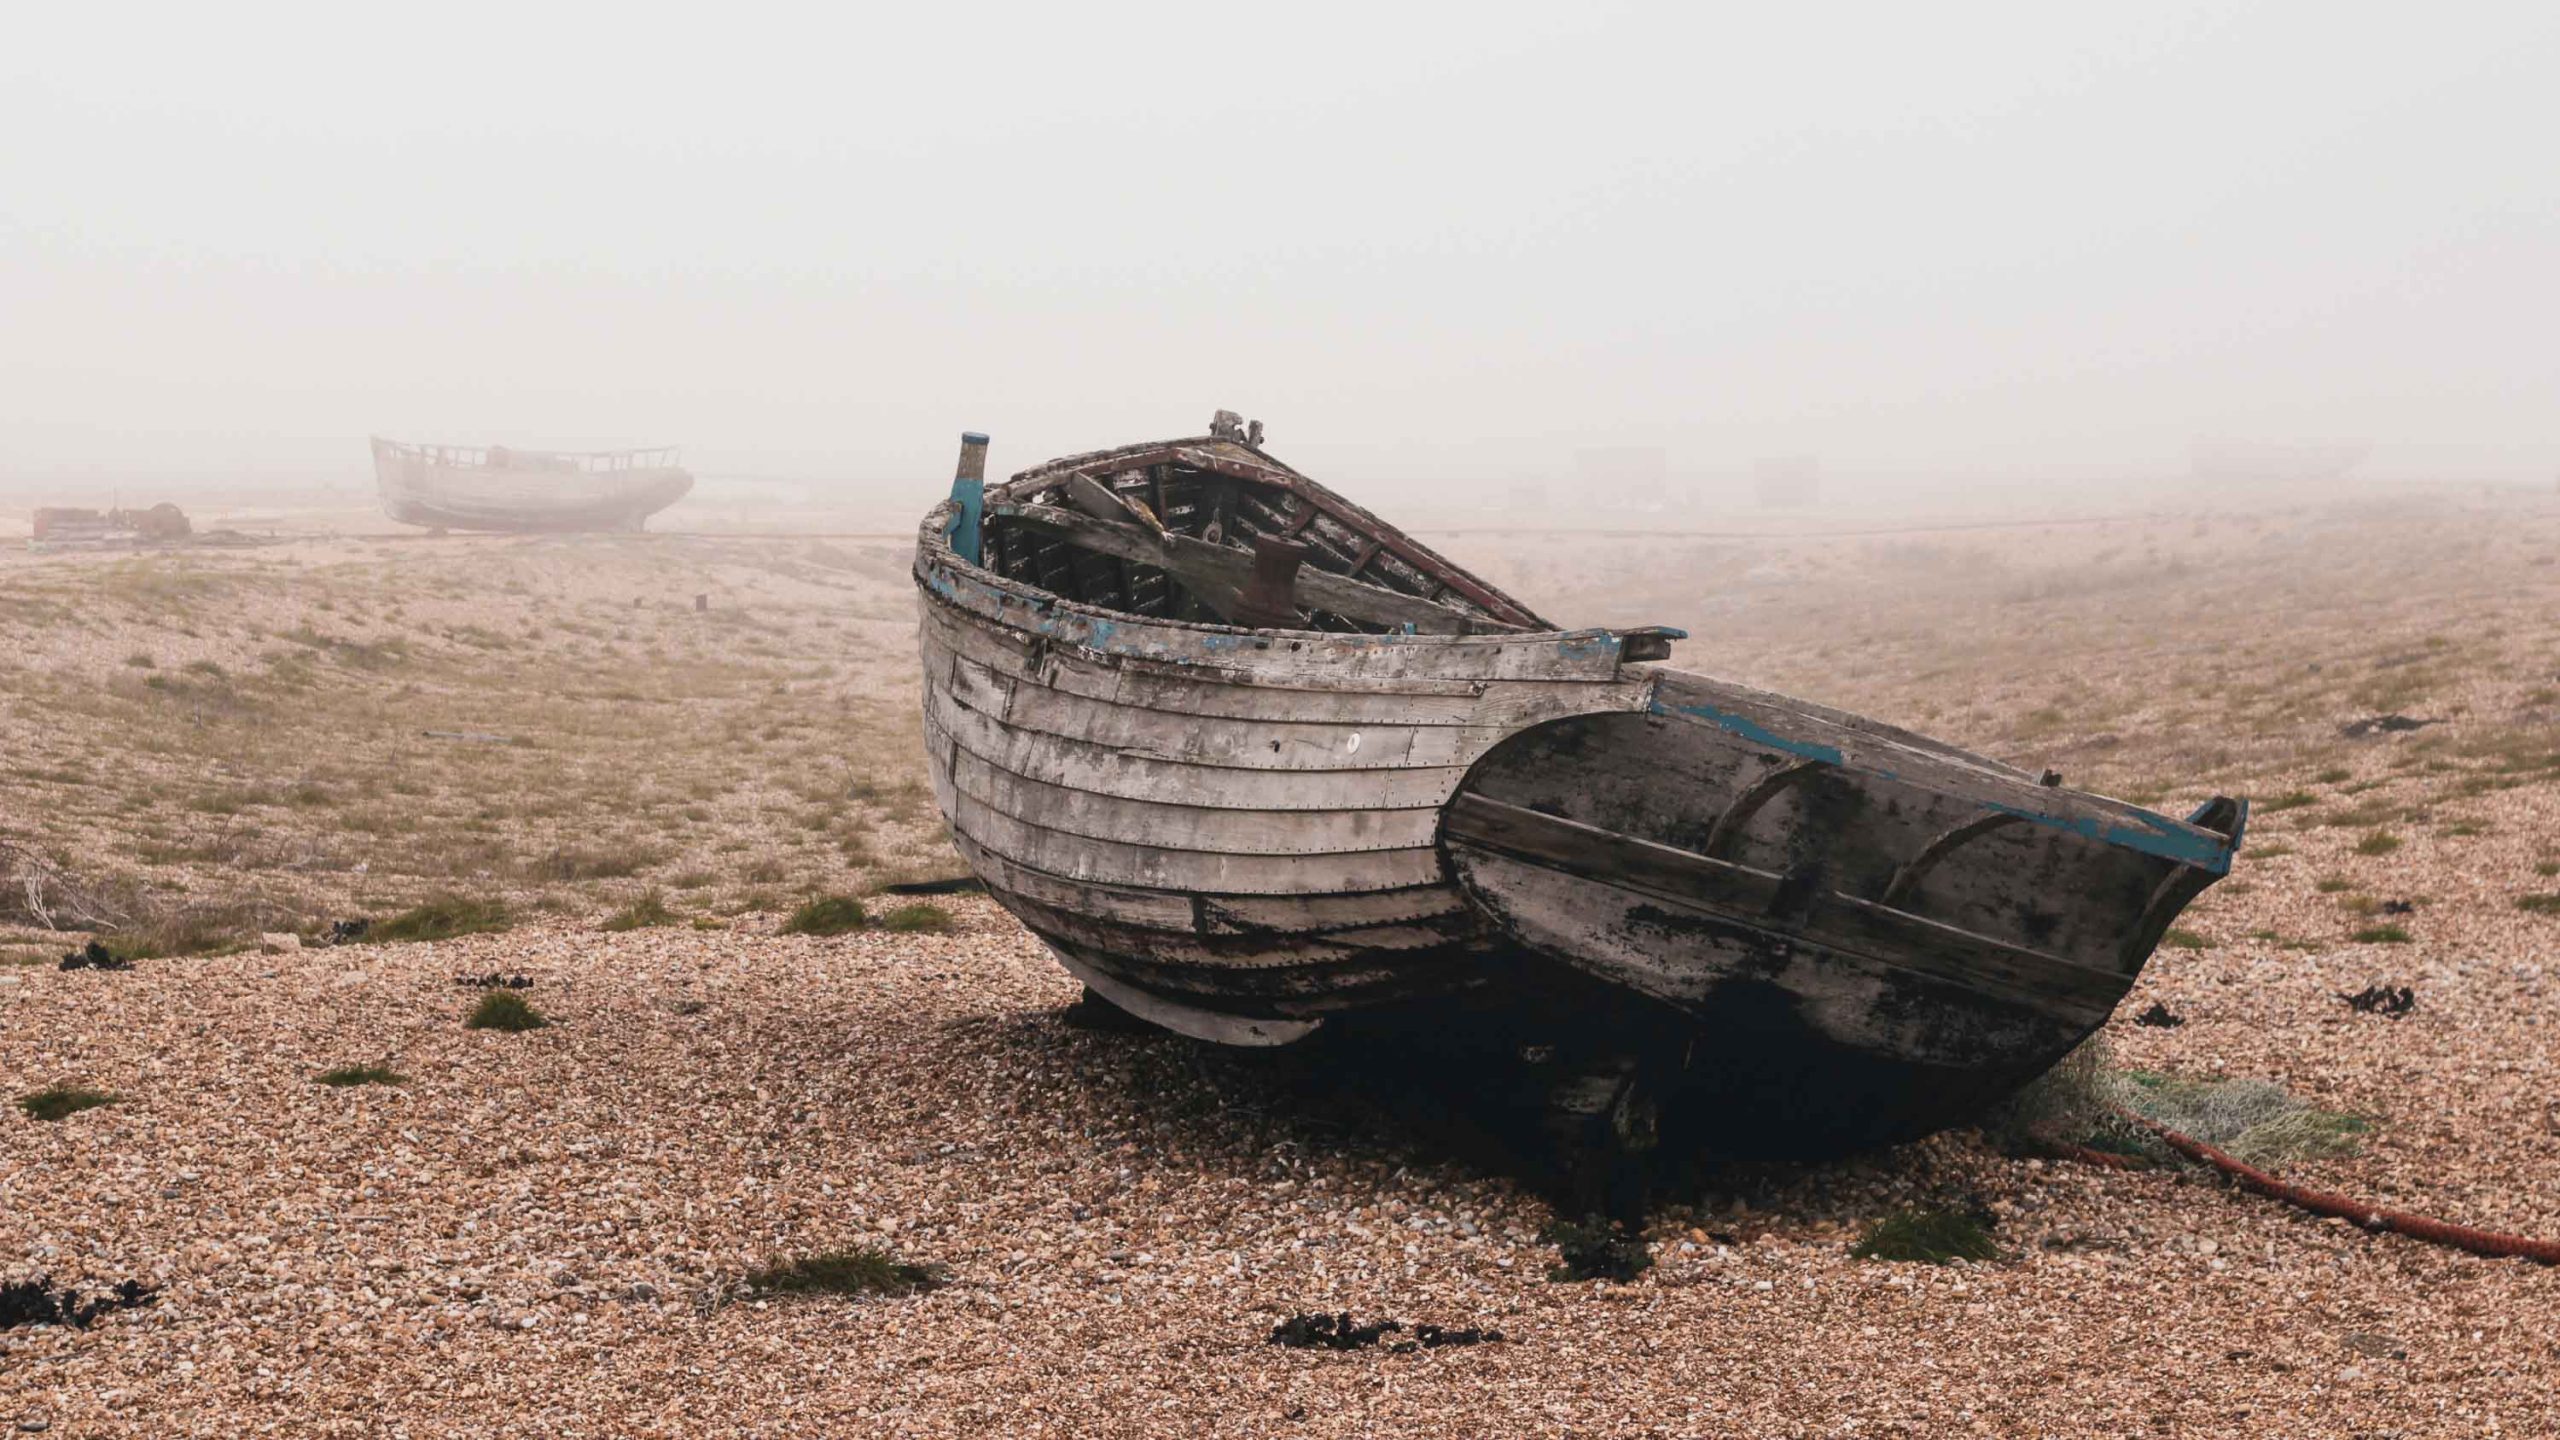 Fishing boats lined up on the beach at Dungeness, Kent, UK.